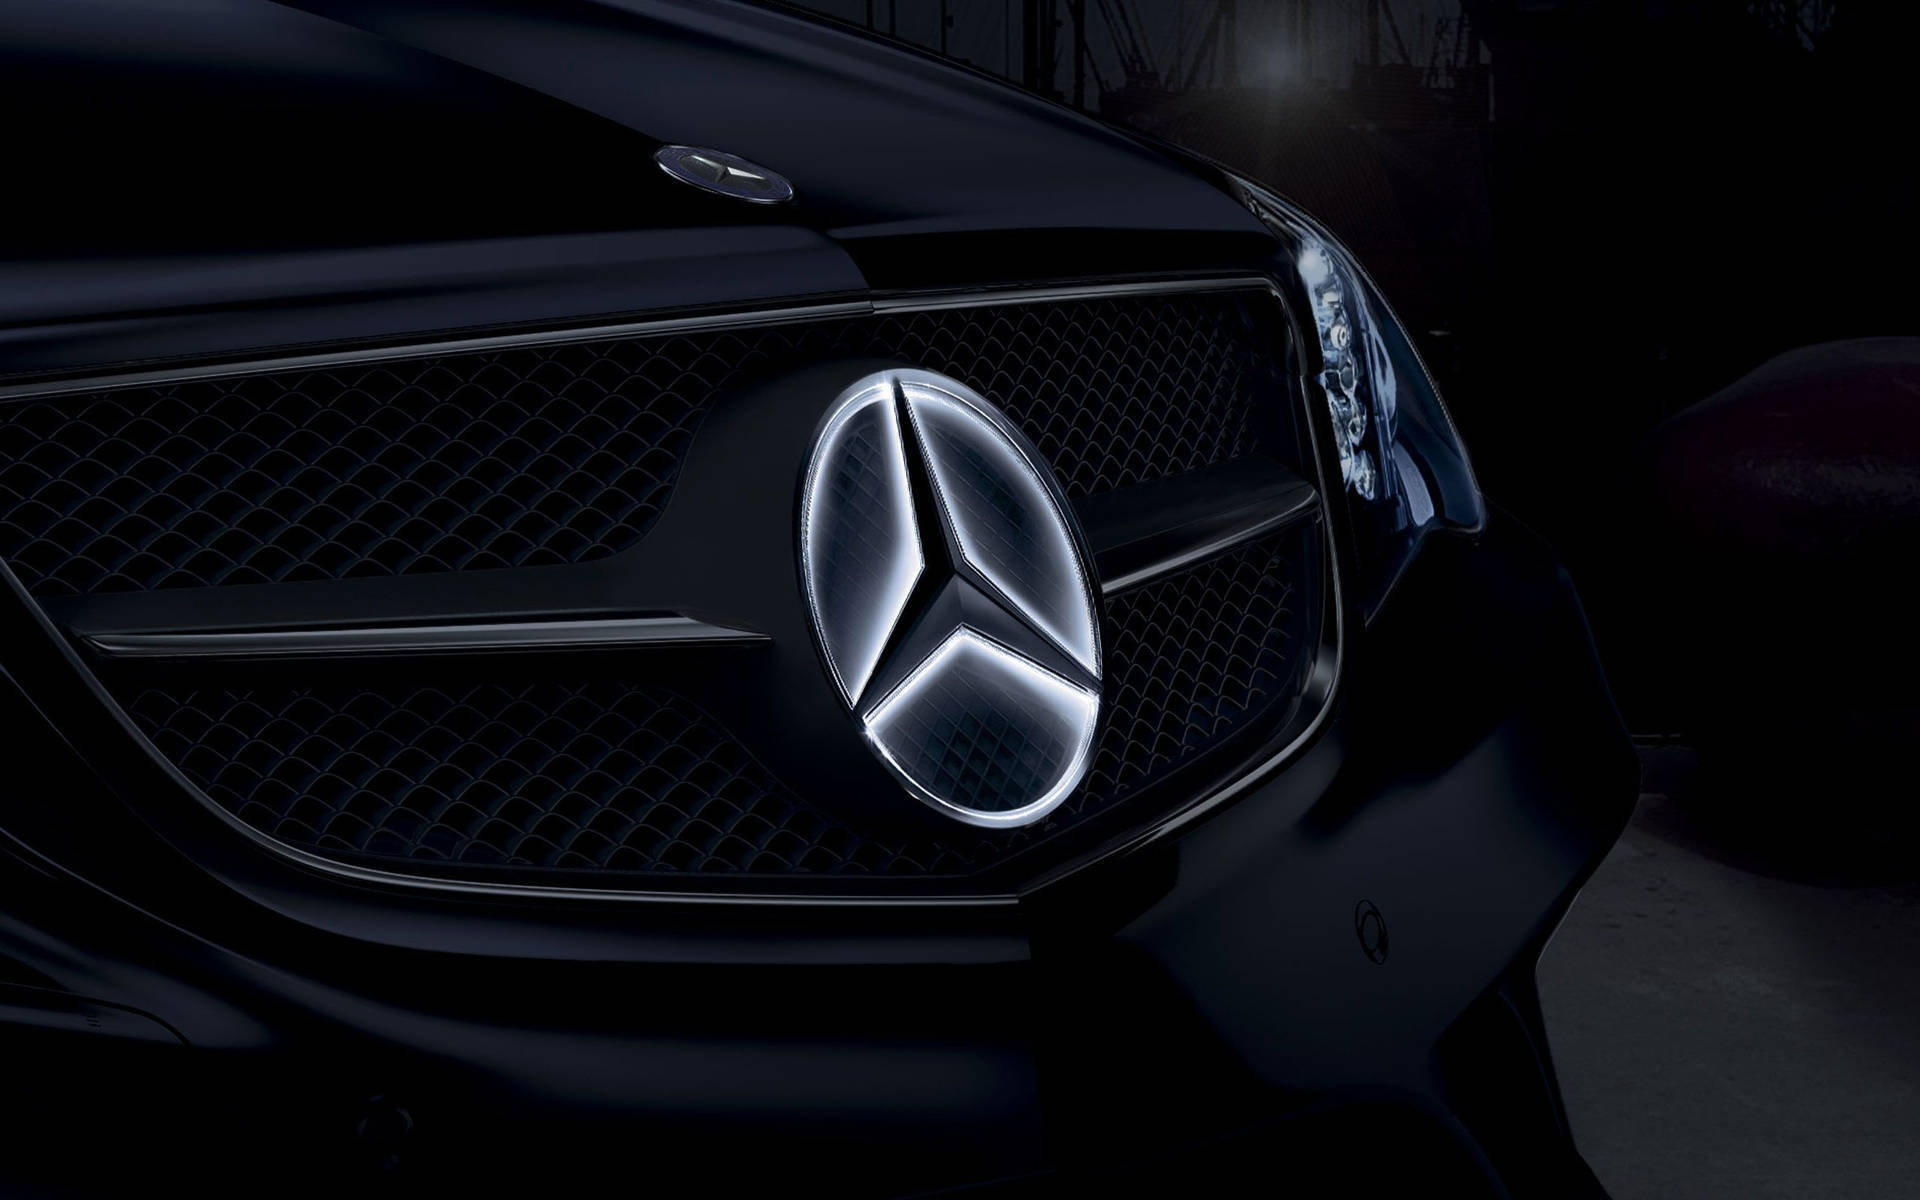 Rev up your productivity with the Mercedes Desktop Wallpaper